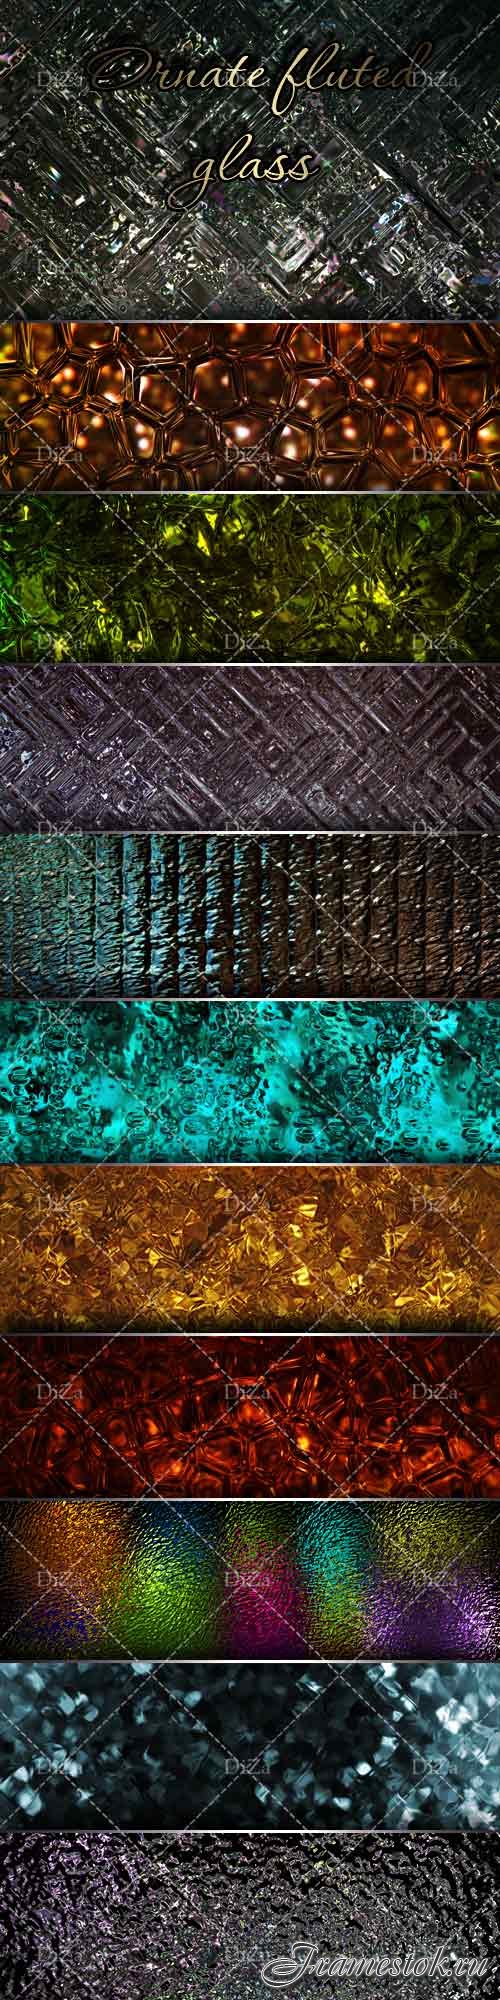 Ornate fluted glass textures